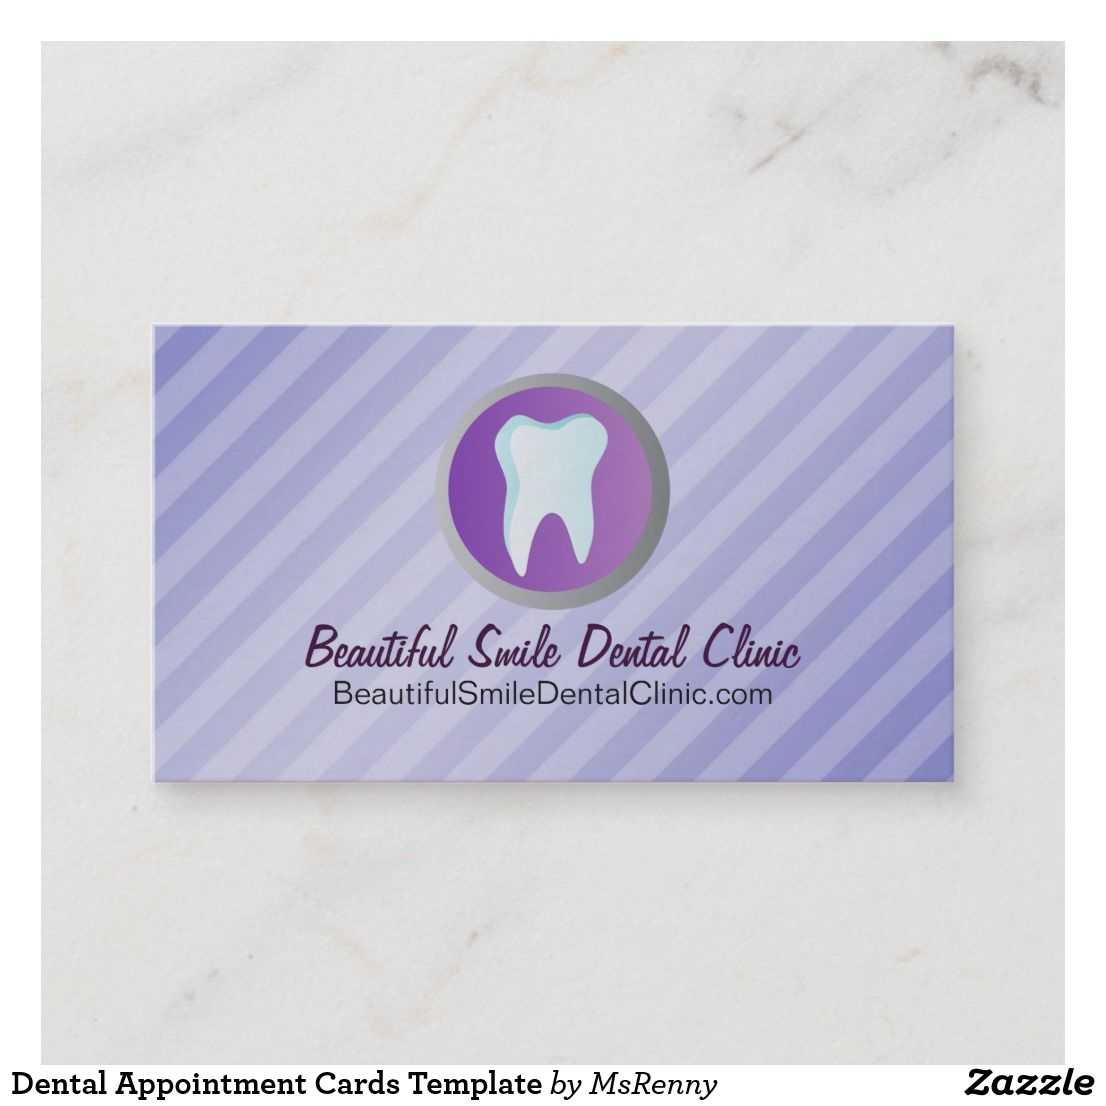 Dental Appointment Cards Template | Zazzle | Business Throughout Dentist Appointment Card Template